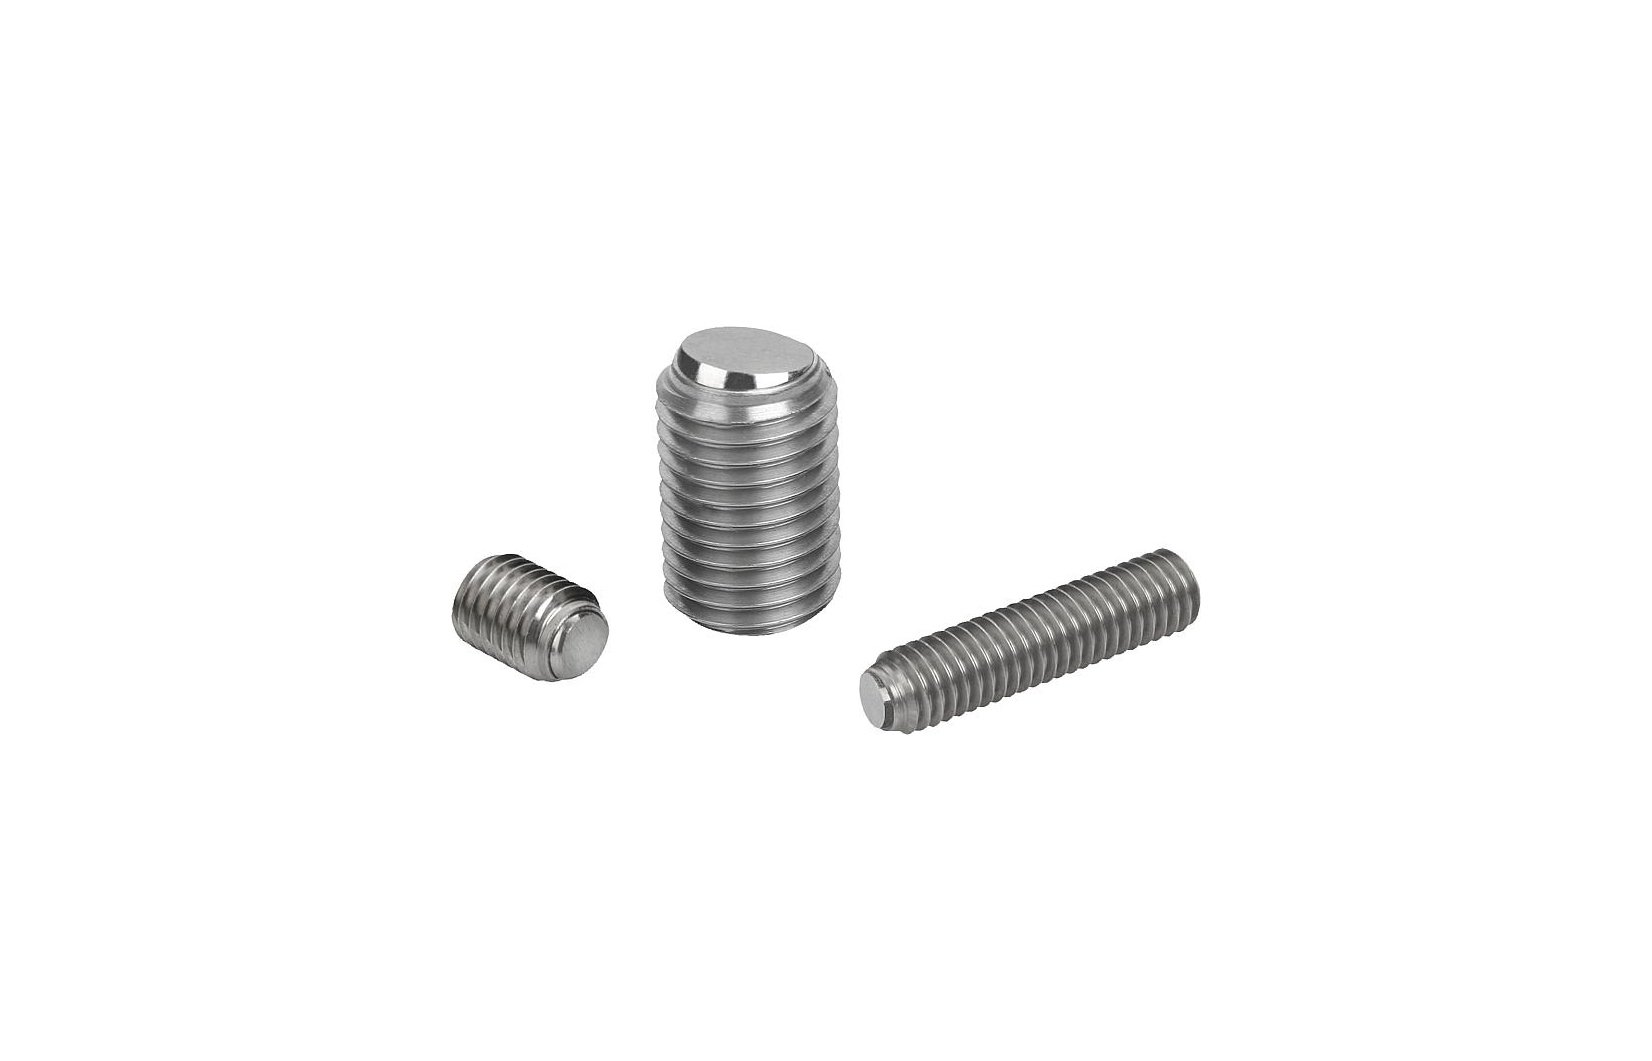 K0384 Ball-end thrust screws without head stainless steel with flattened ball and rotation lock